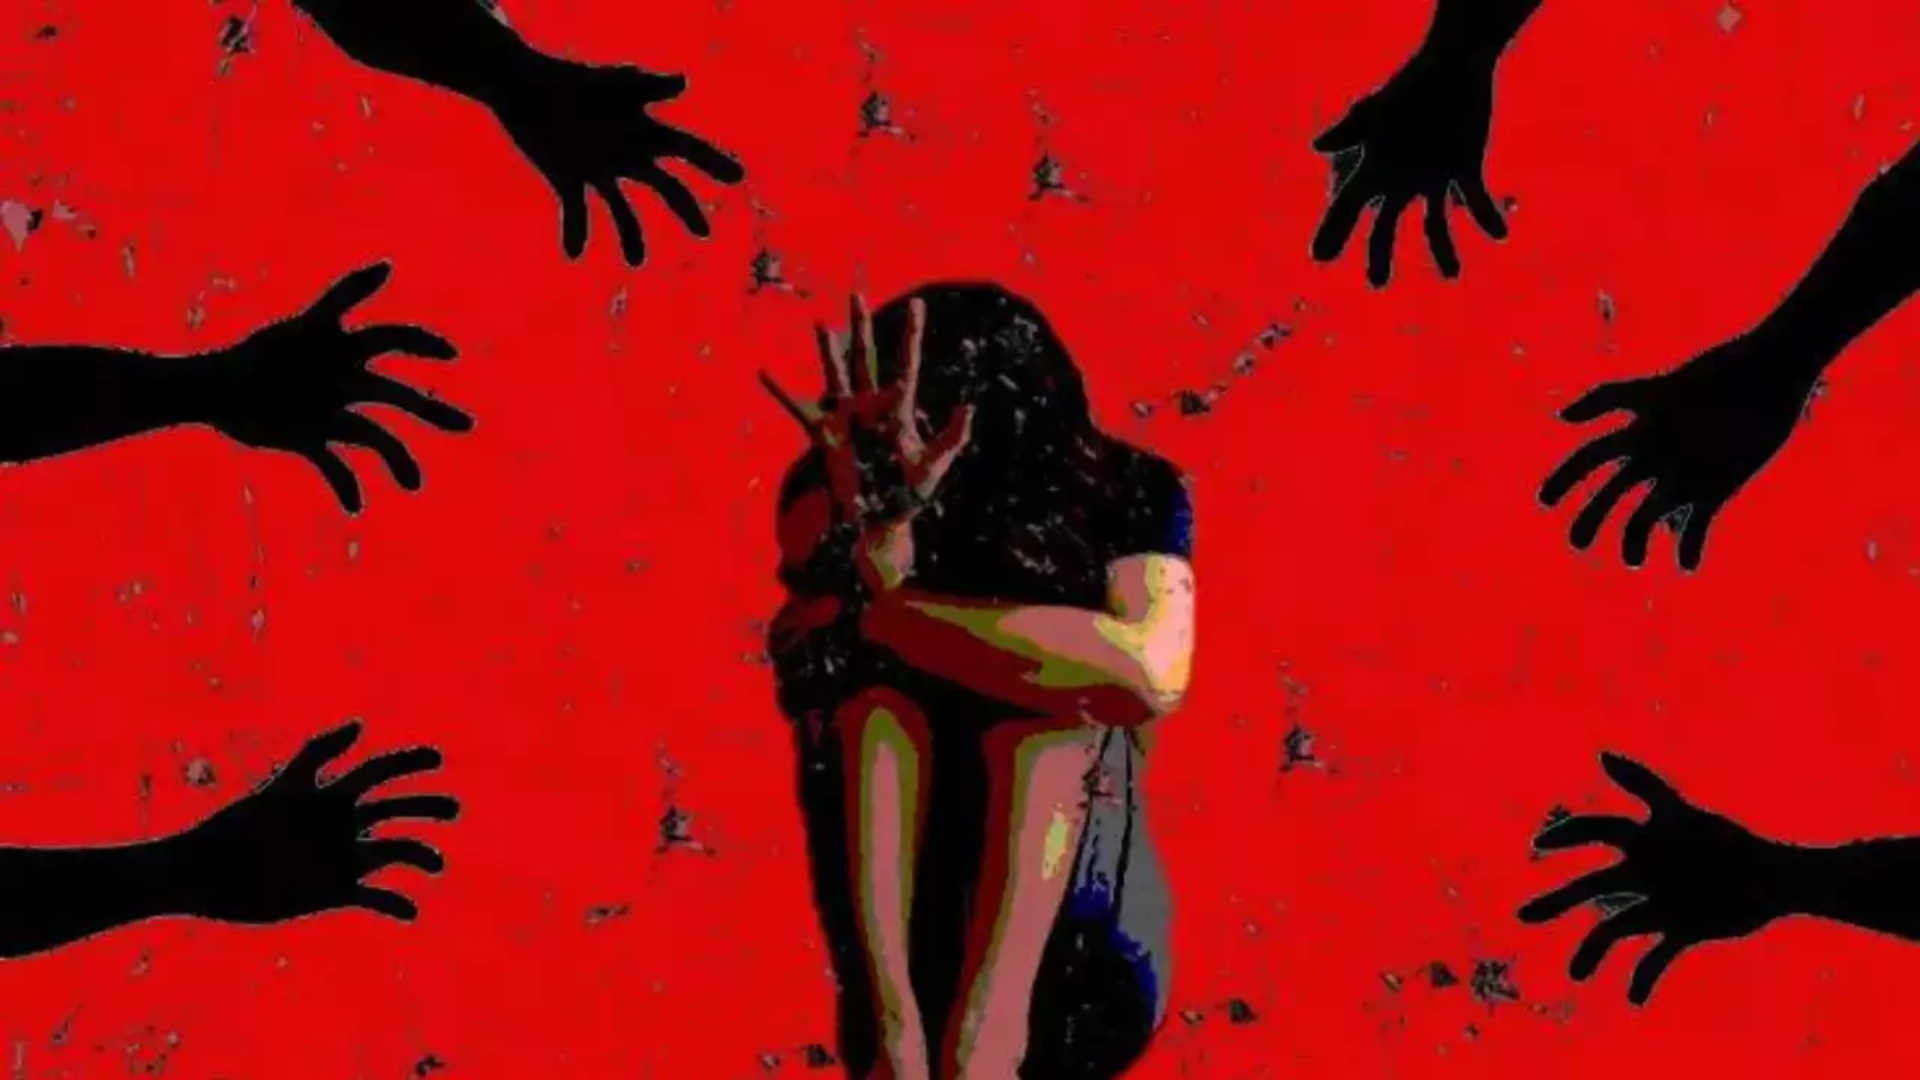 Father-Son duo Abducted Dalit Girl, Raped her, Took Her To Dargah